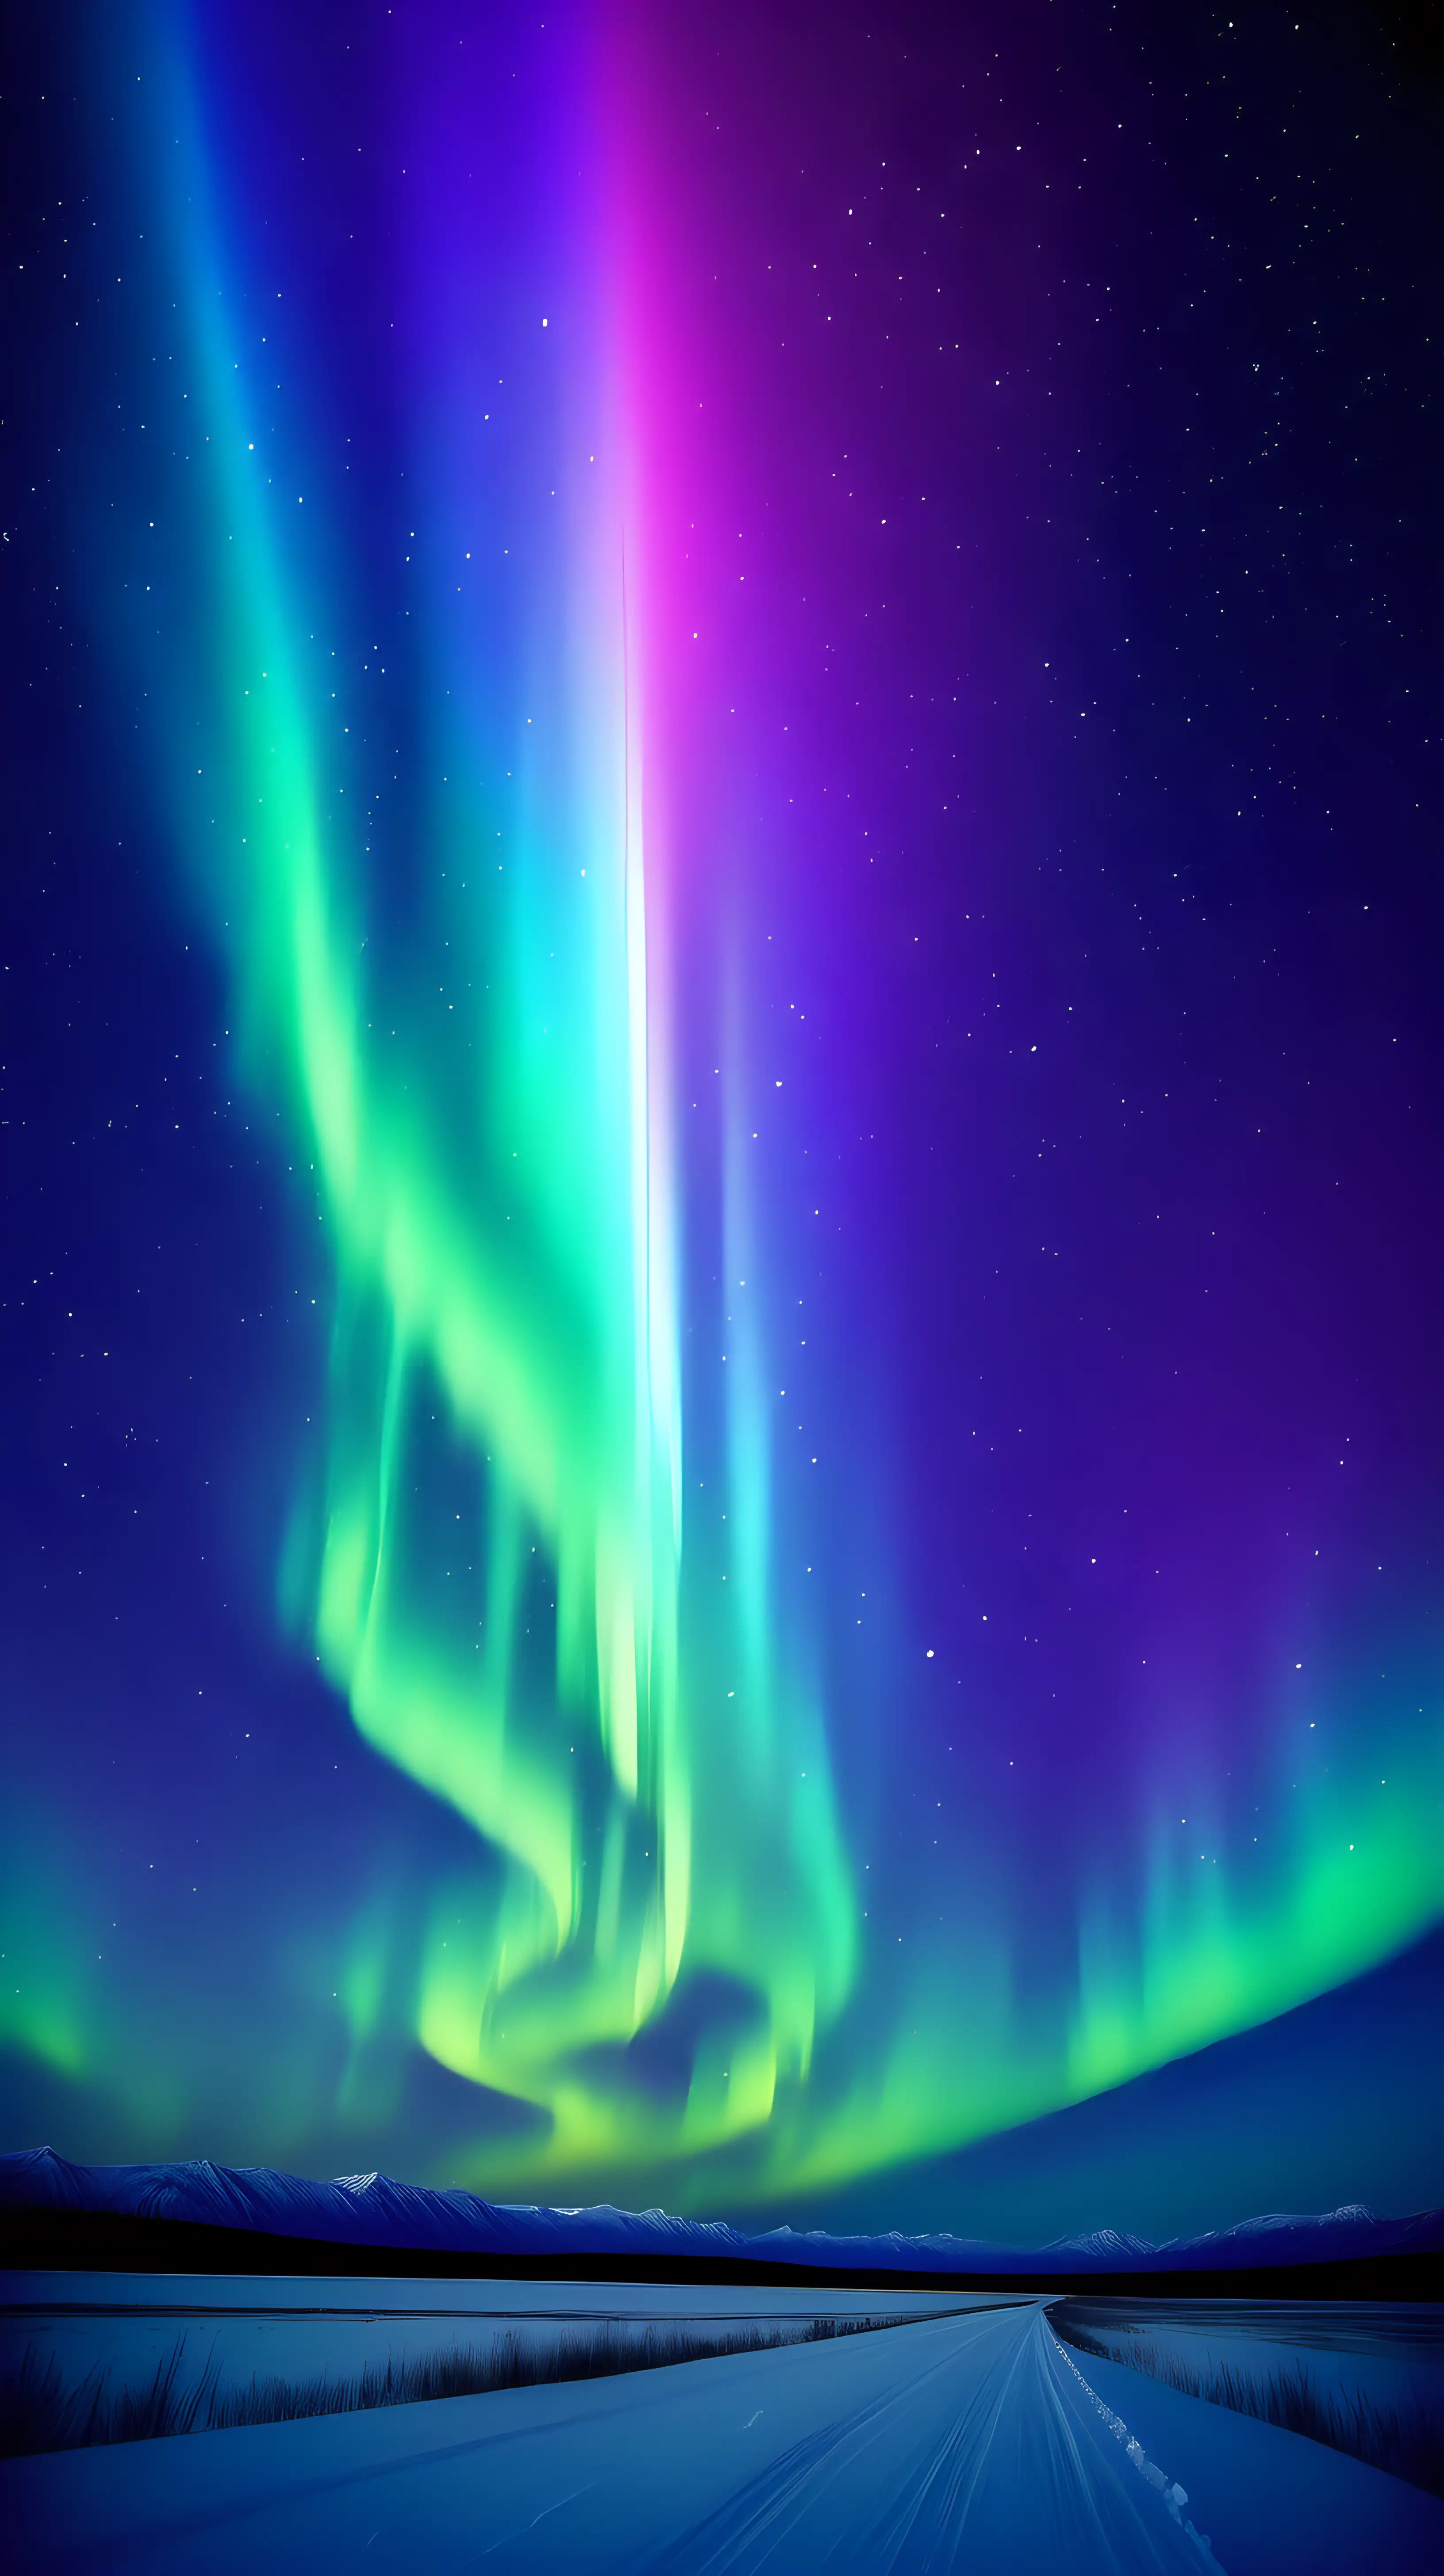 aurora skies, with stars in the sky, colorful blues, purples, greens, yellows with a flat horizon, no ground, no mountains, no snow, no trees, no trees, no mountains, no earth, only sky









